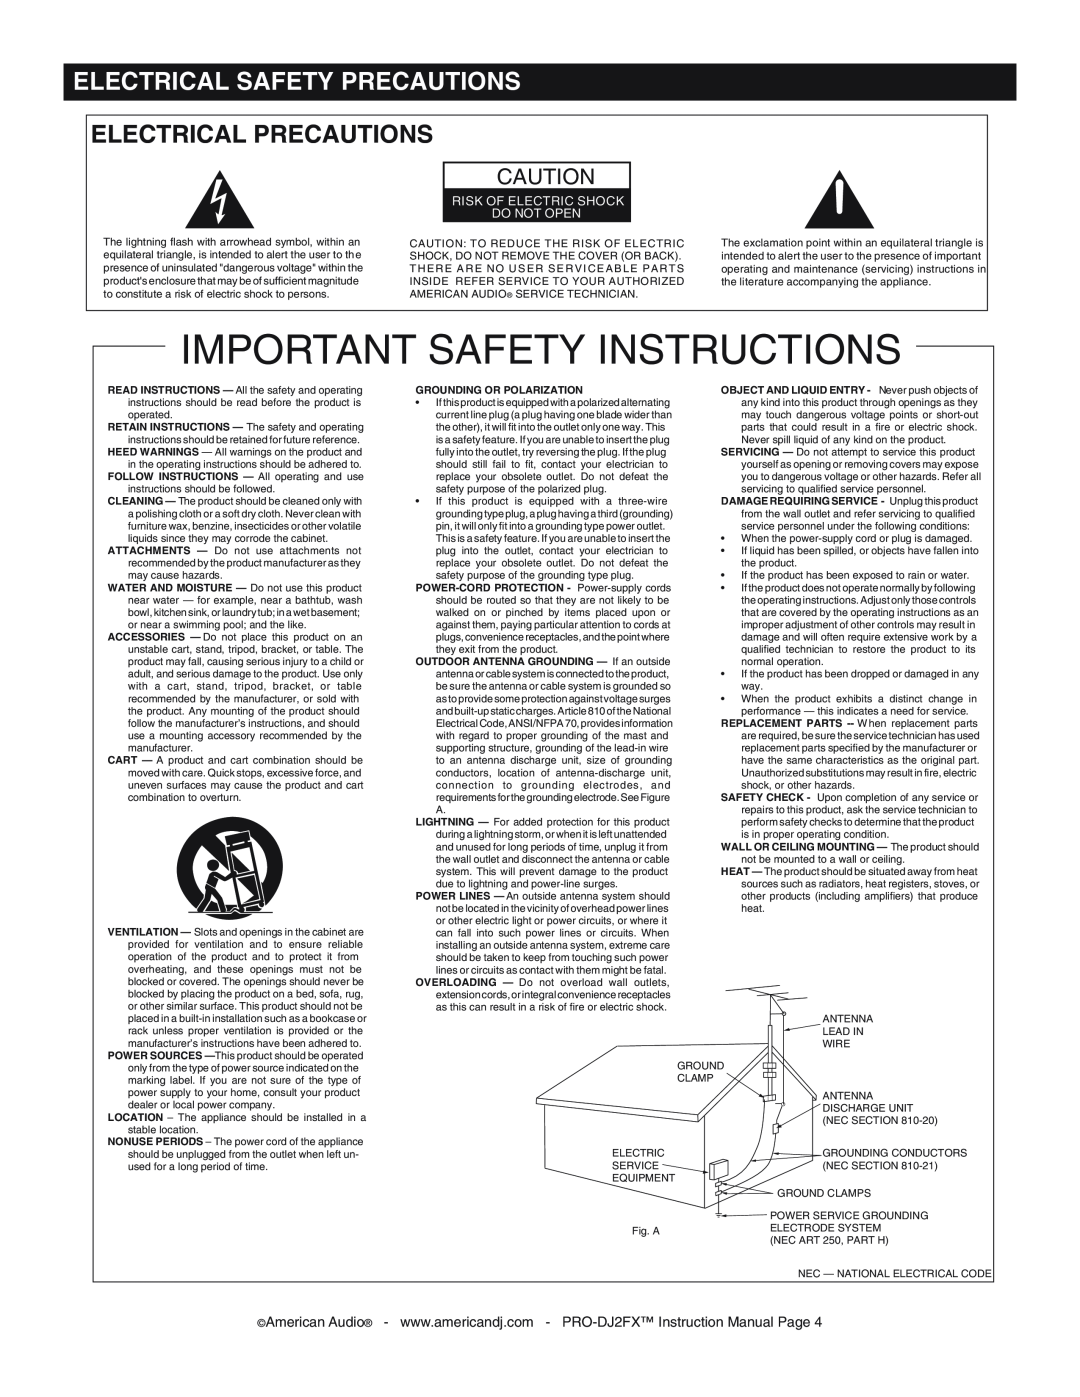 American Audio PRO-DJ2FX Electrical Precautions, Important Safety Instructions, Electrical Safety Precautions 